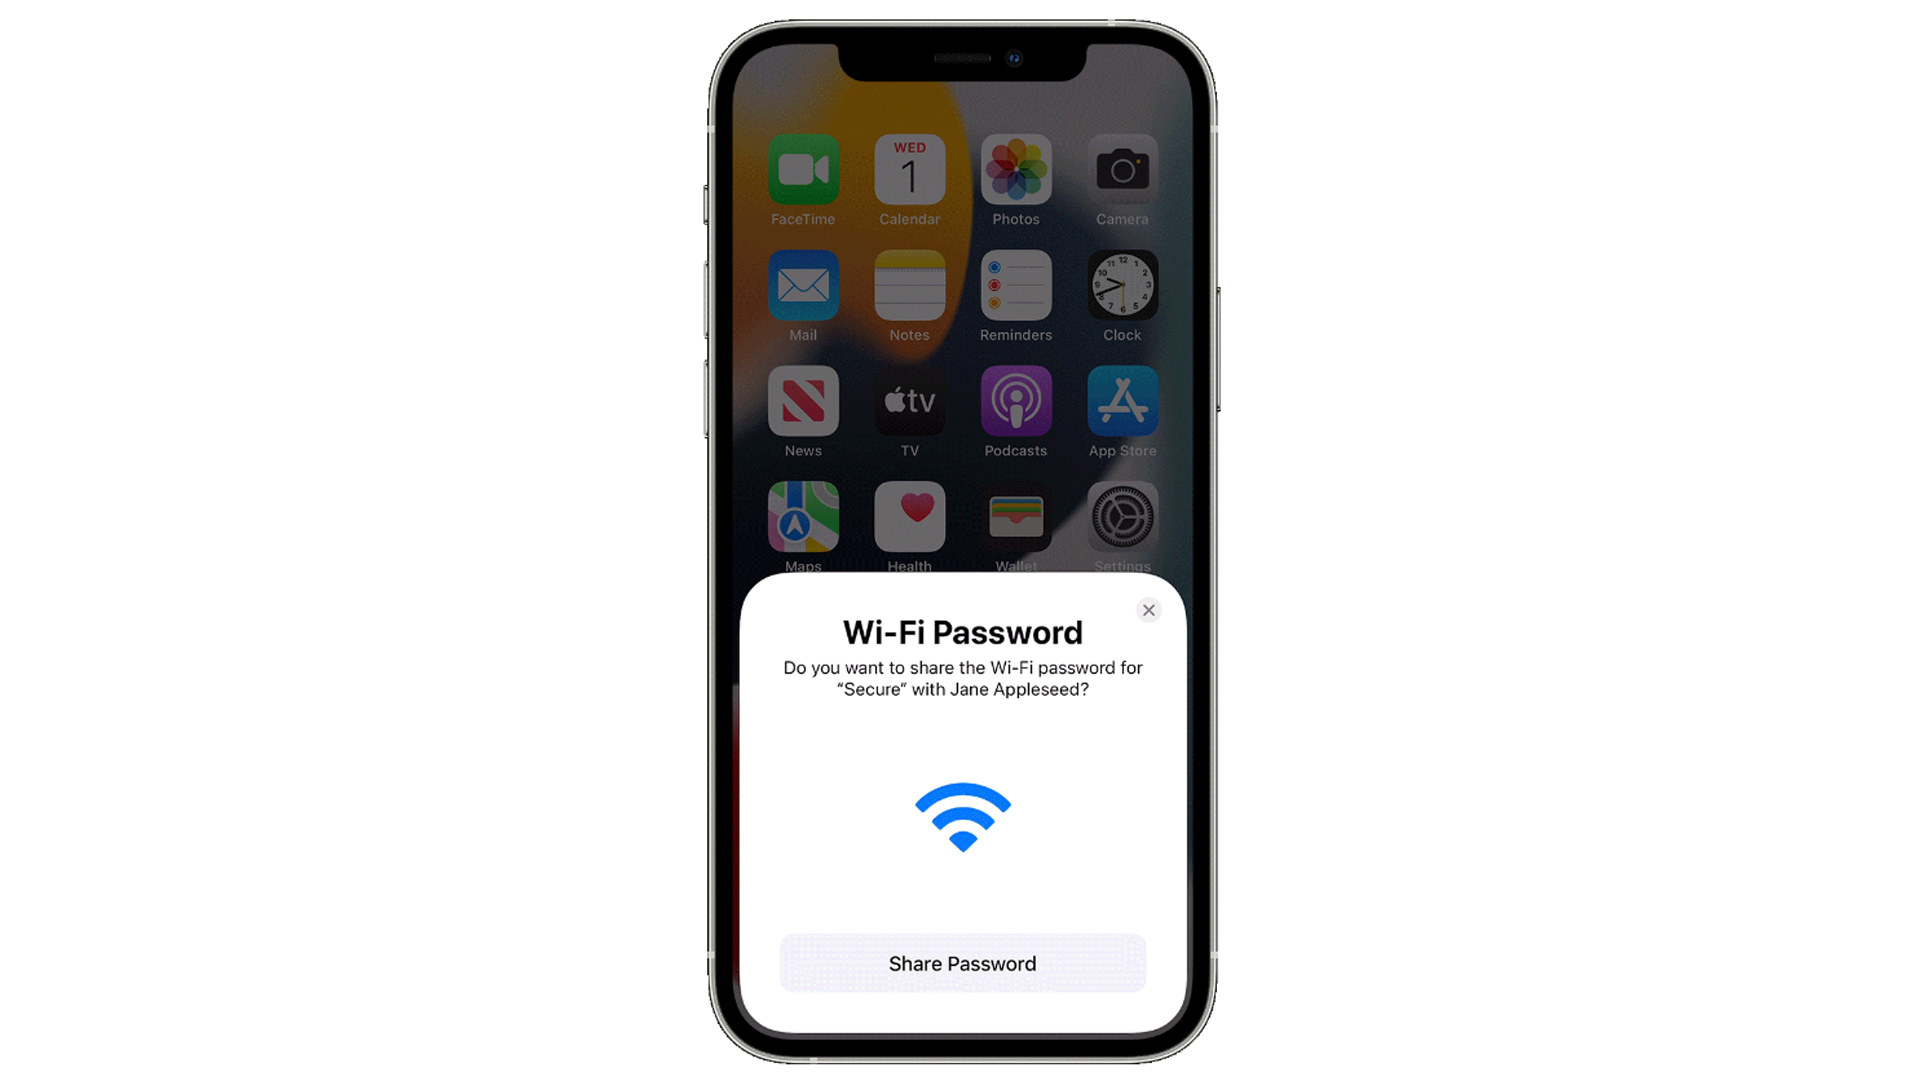 Sharing a password on an iPhone